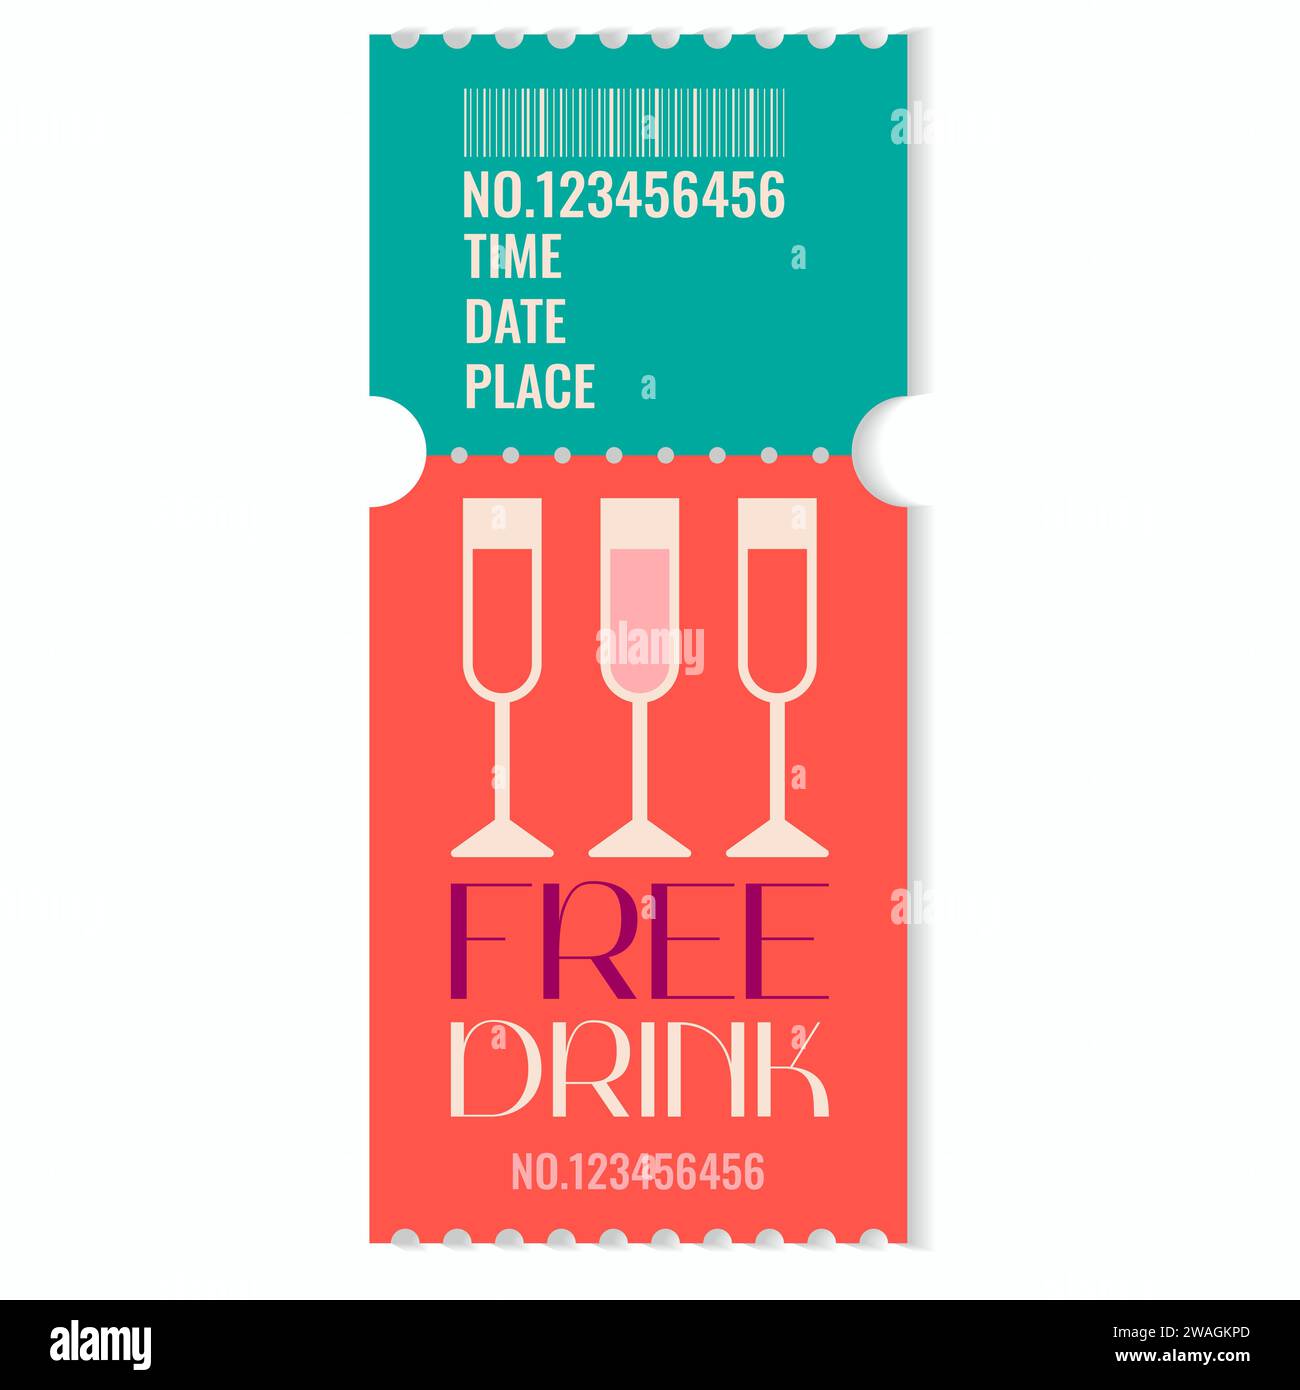 Free drink voucher template.Promotion,happy hour,opening or night party concept with date,time and place.Vector illustration EPS 10 Stock Vector